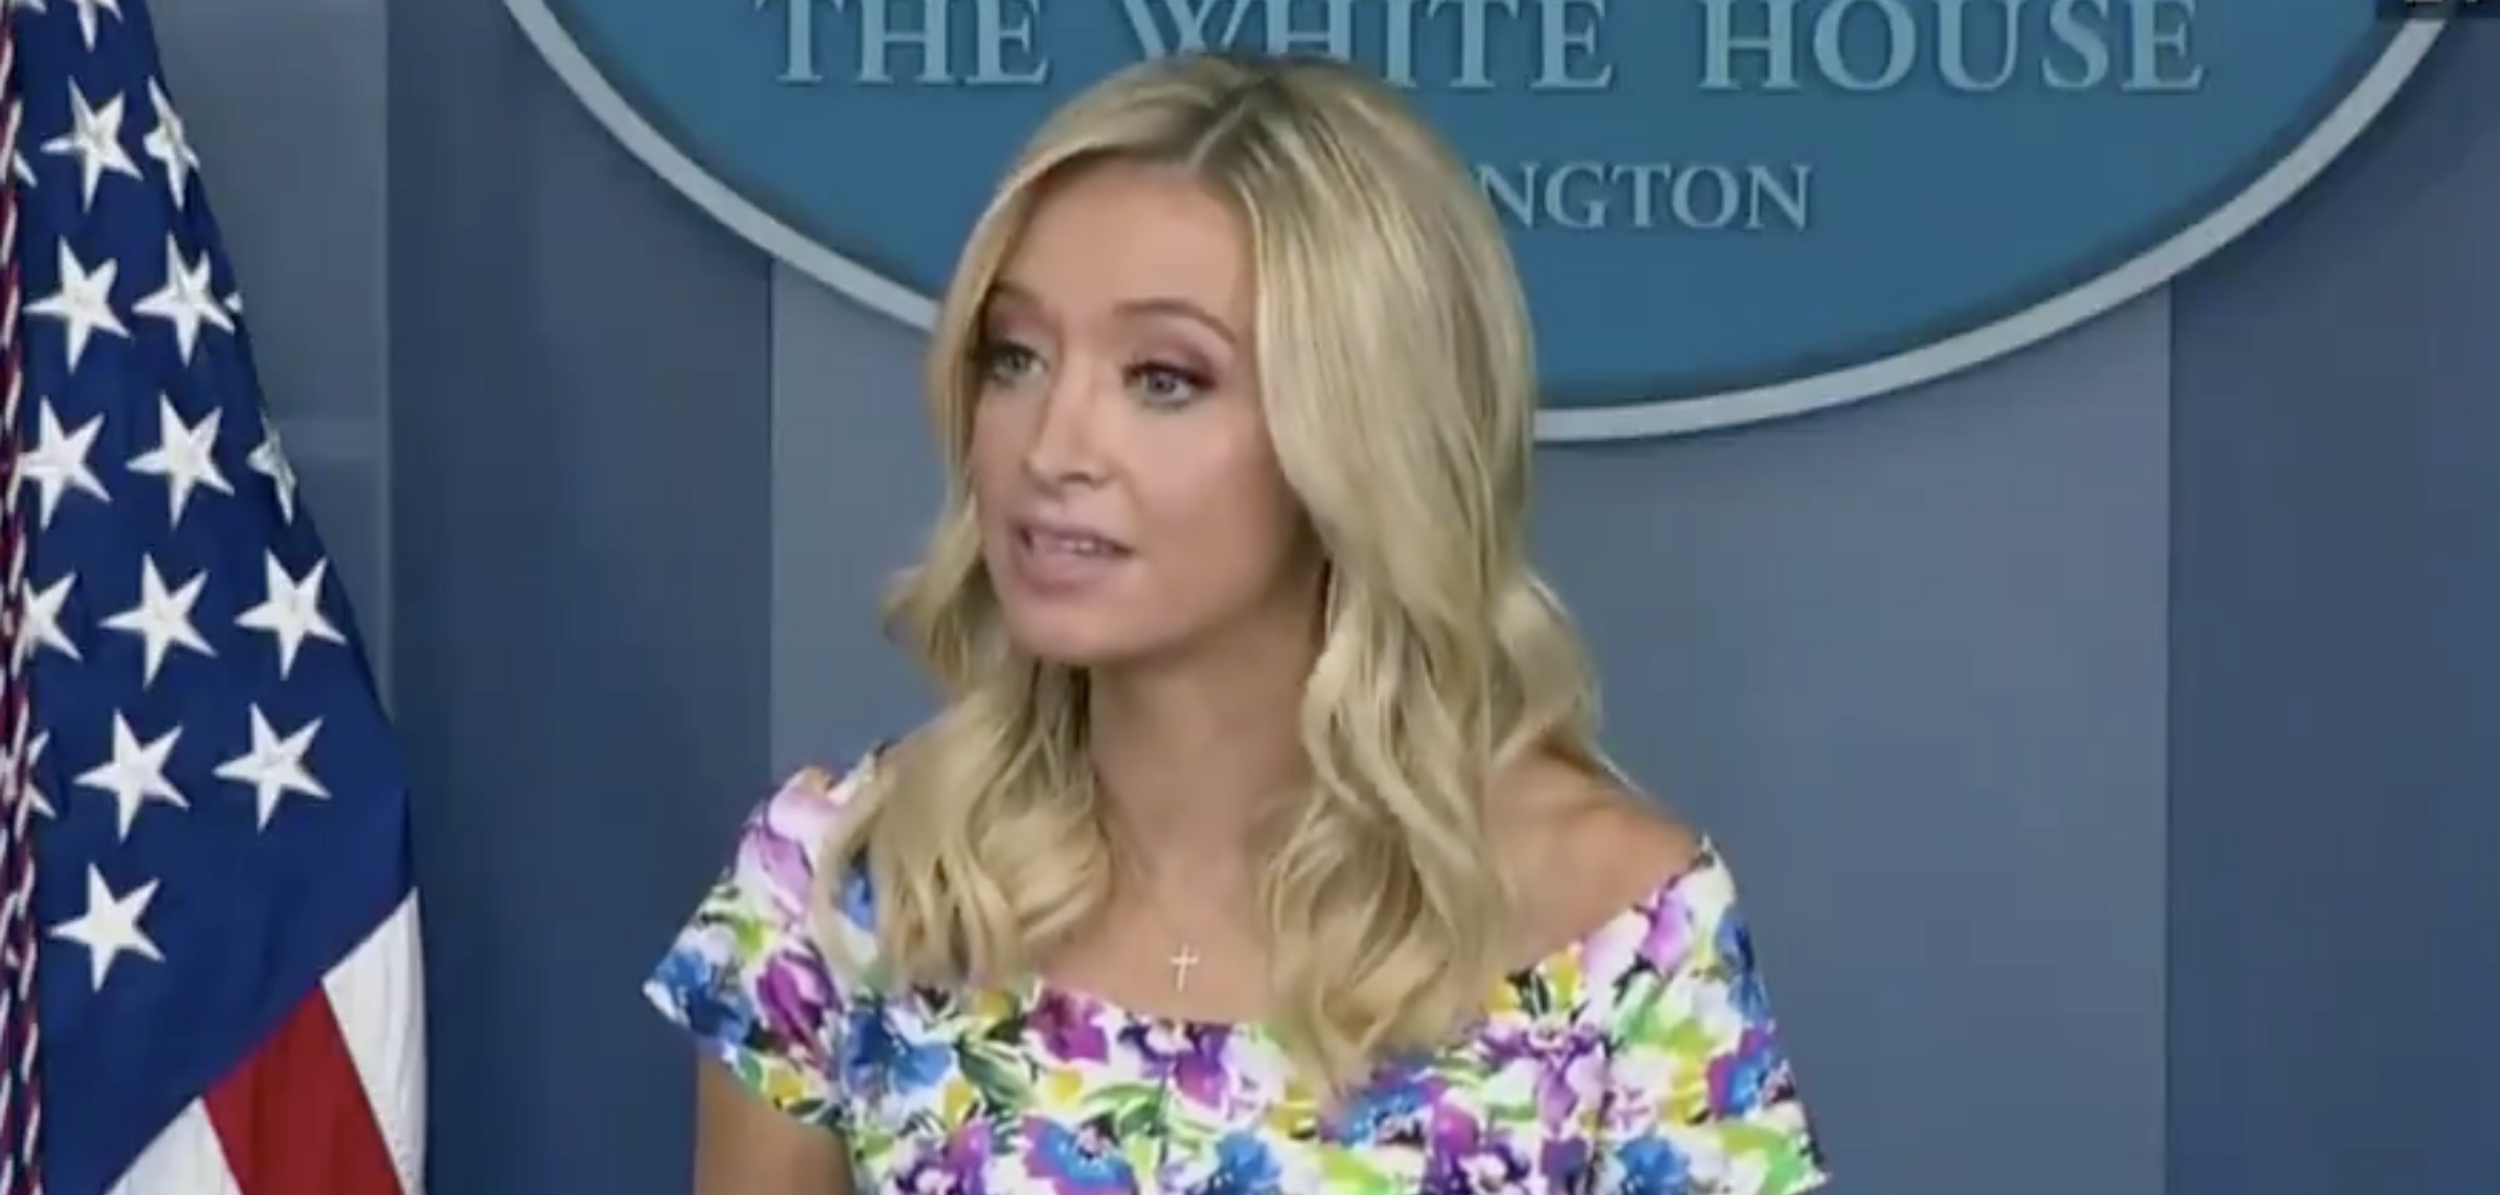 Kayleigh McEnany Roasted for Her Confident Defense of Trump's Latest Claim That the Virus Will 'Just Disappear'